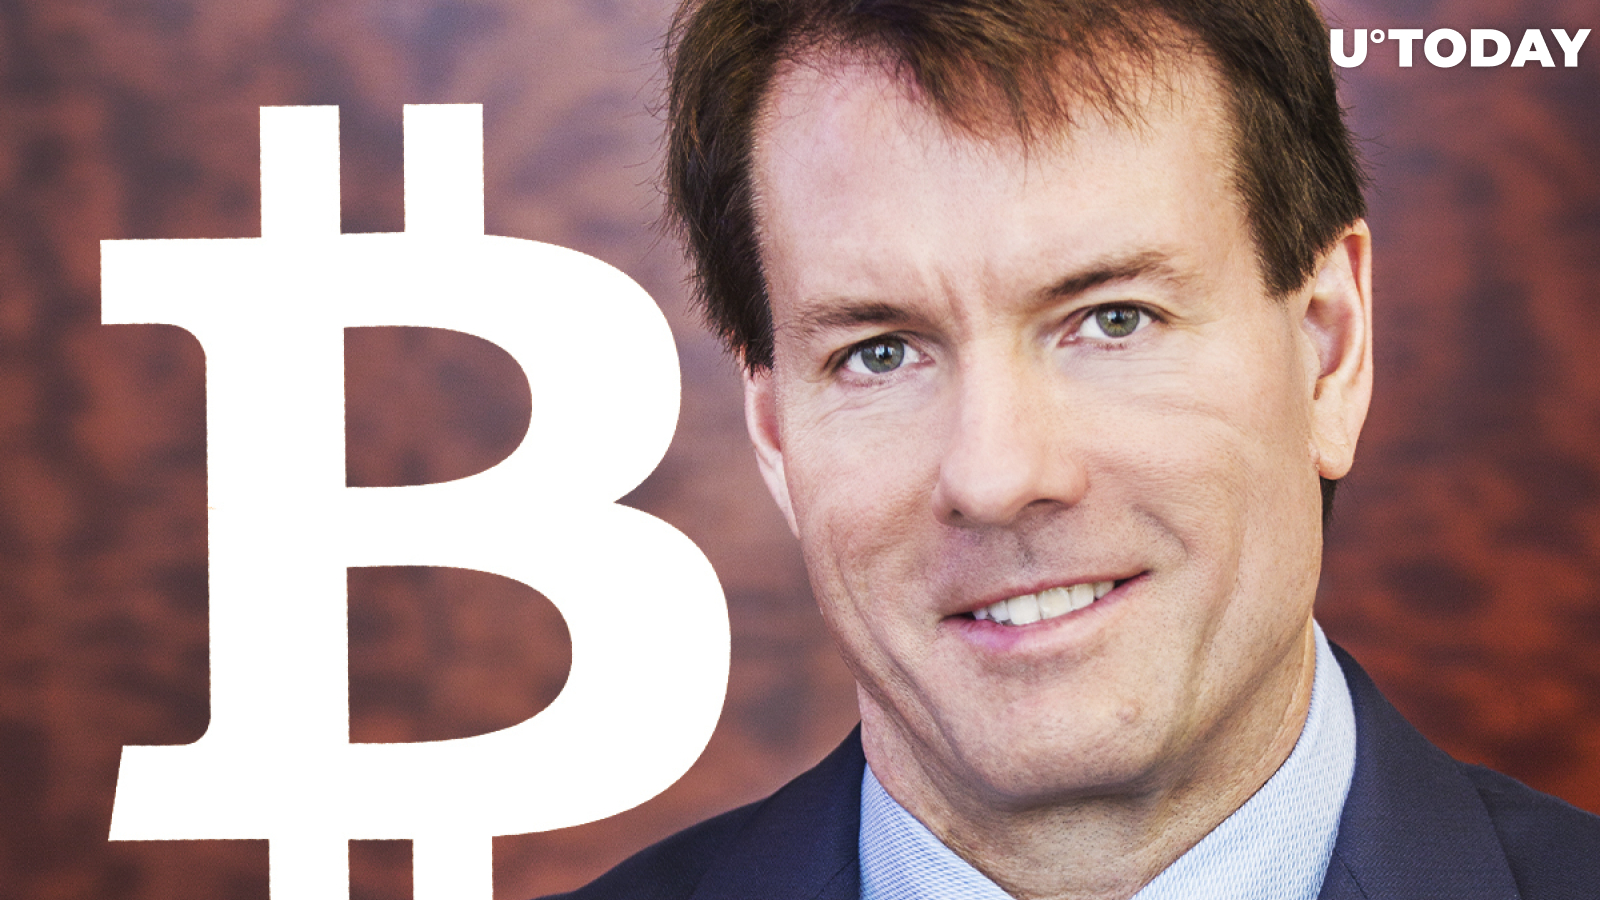 Here’s How Far Bitcoin Goes Ahead of Gold as Store of Value This Year: Michael Saylor